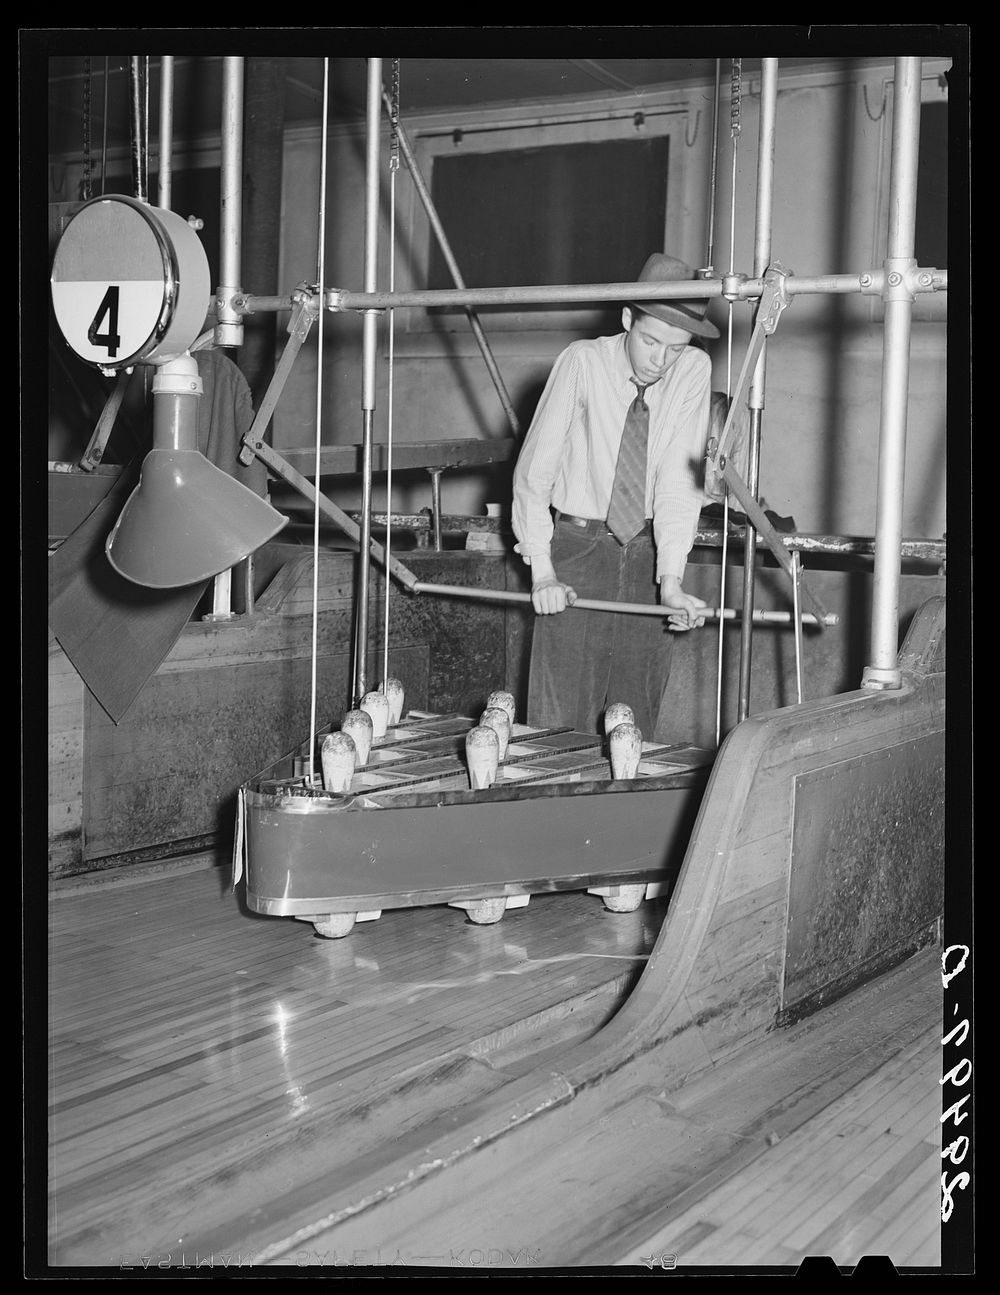 [Untitled photo, possibly related to: Pin boy in bowling alley. Clinton, Indiana]. Sourced from the Library of Congress.